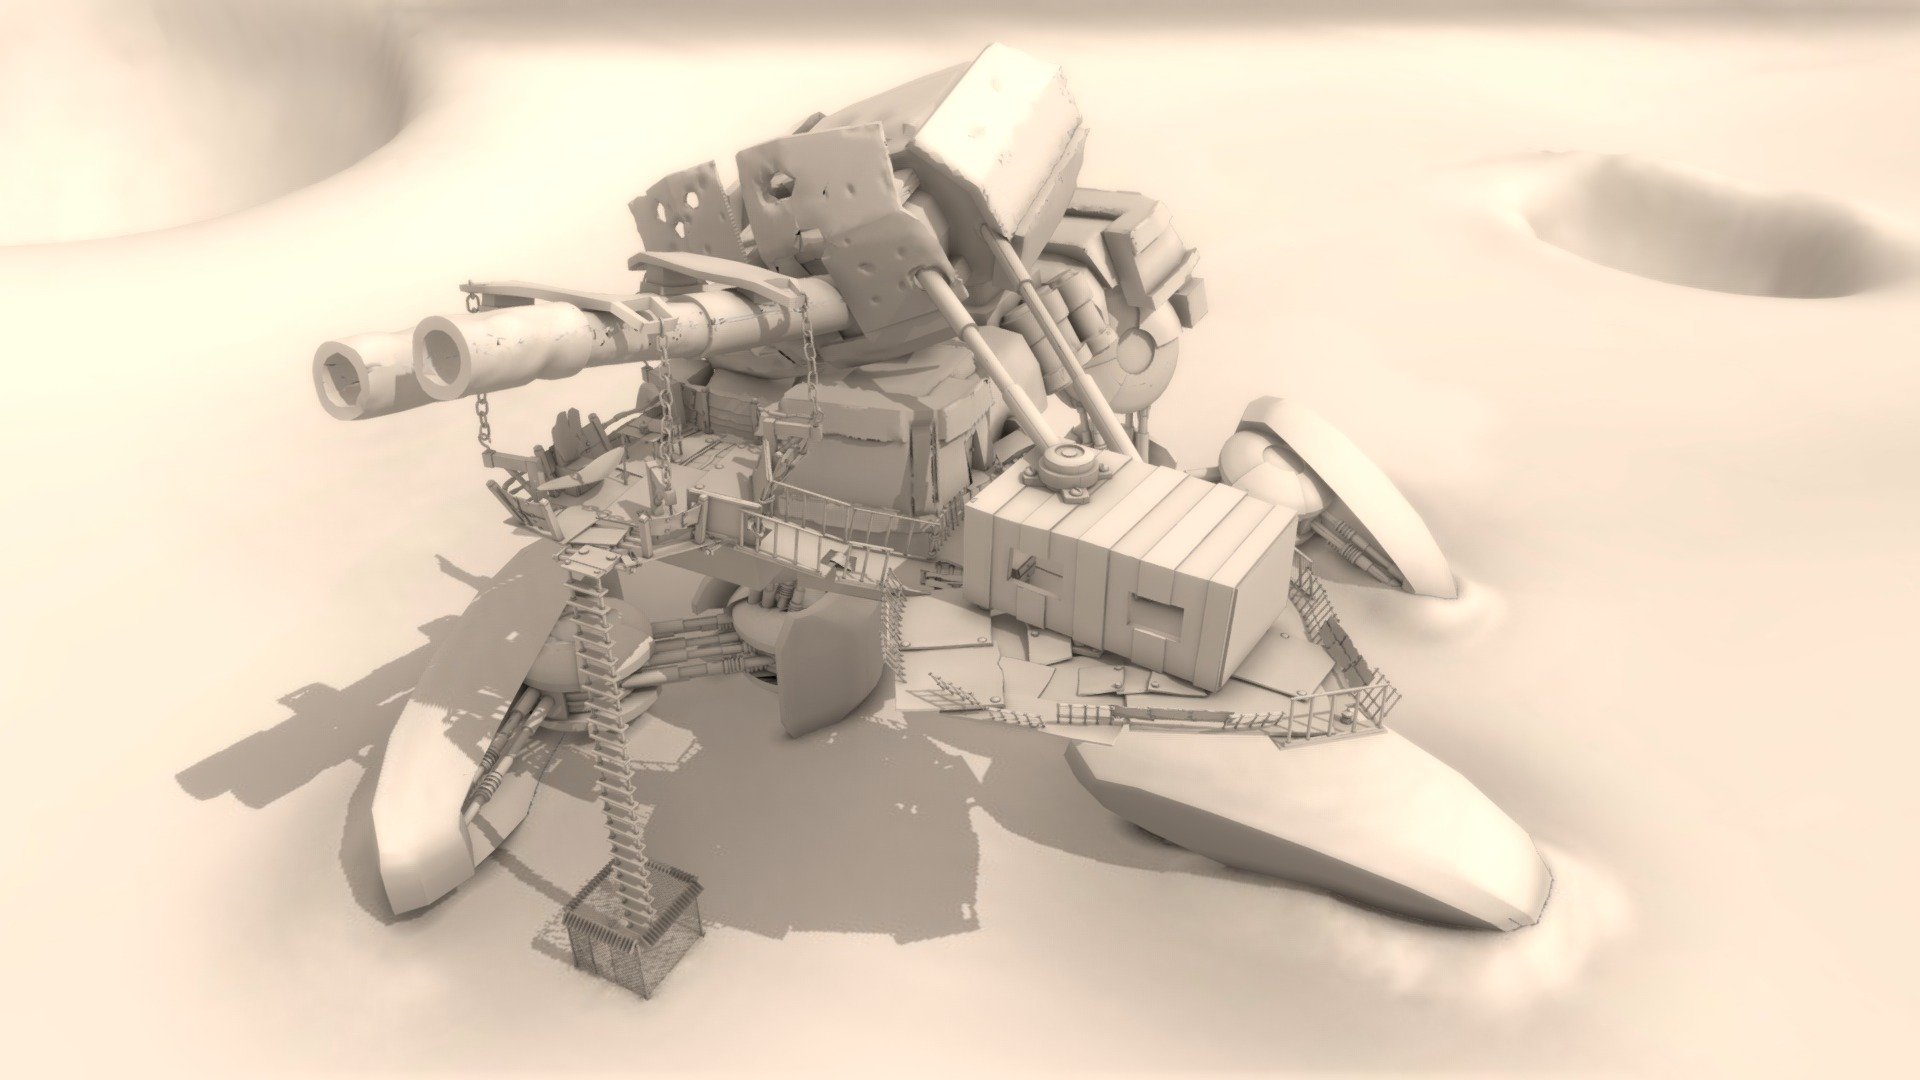 The render baking is a  bit bad quality since this was intended for rendering not realtime

Made in blender for a school project, the teacher just asked for a room with a certain thematic going for it, soo I picked the &ldquo;giant destroyed mech wasteland home